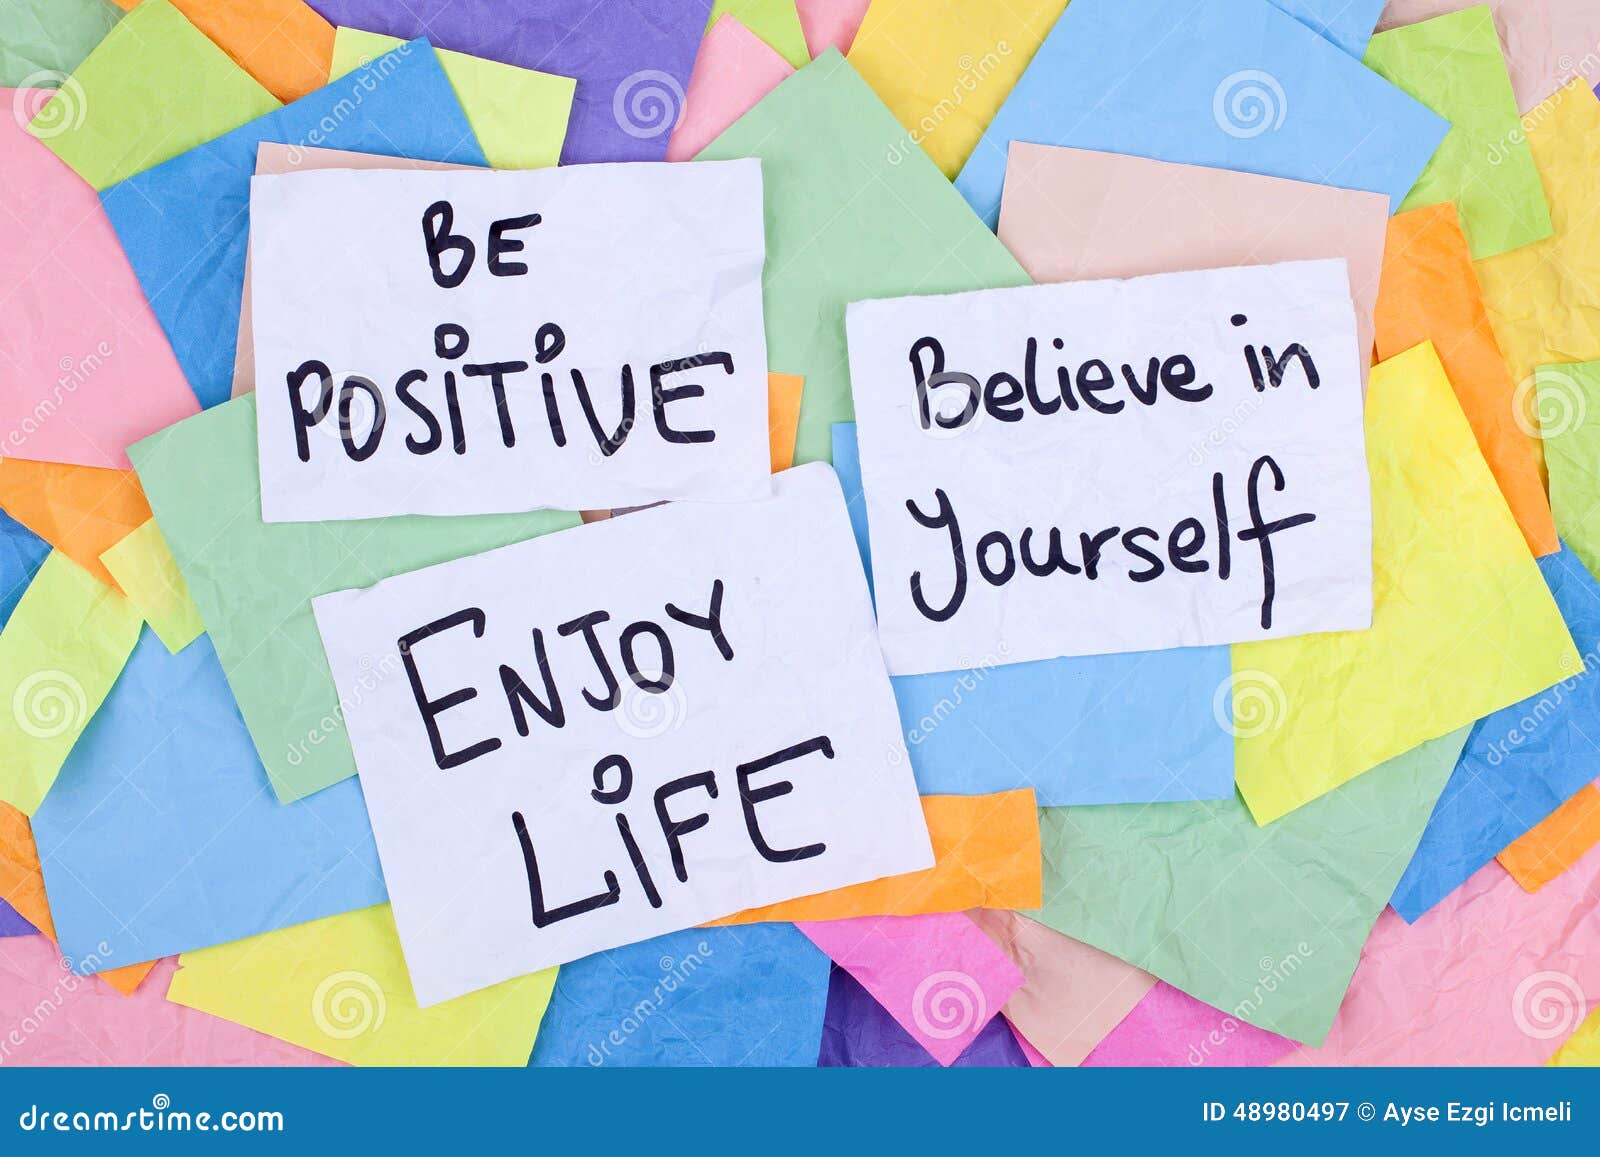 essay on be positive to enjoy life